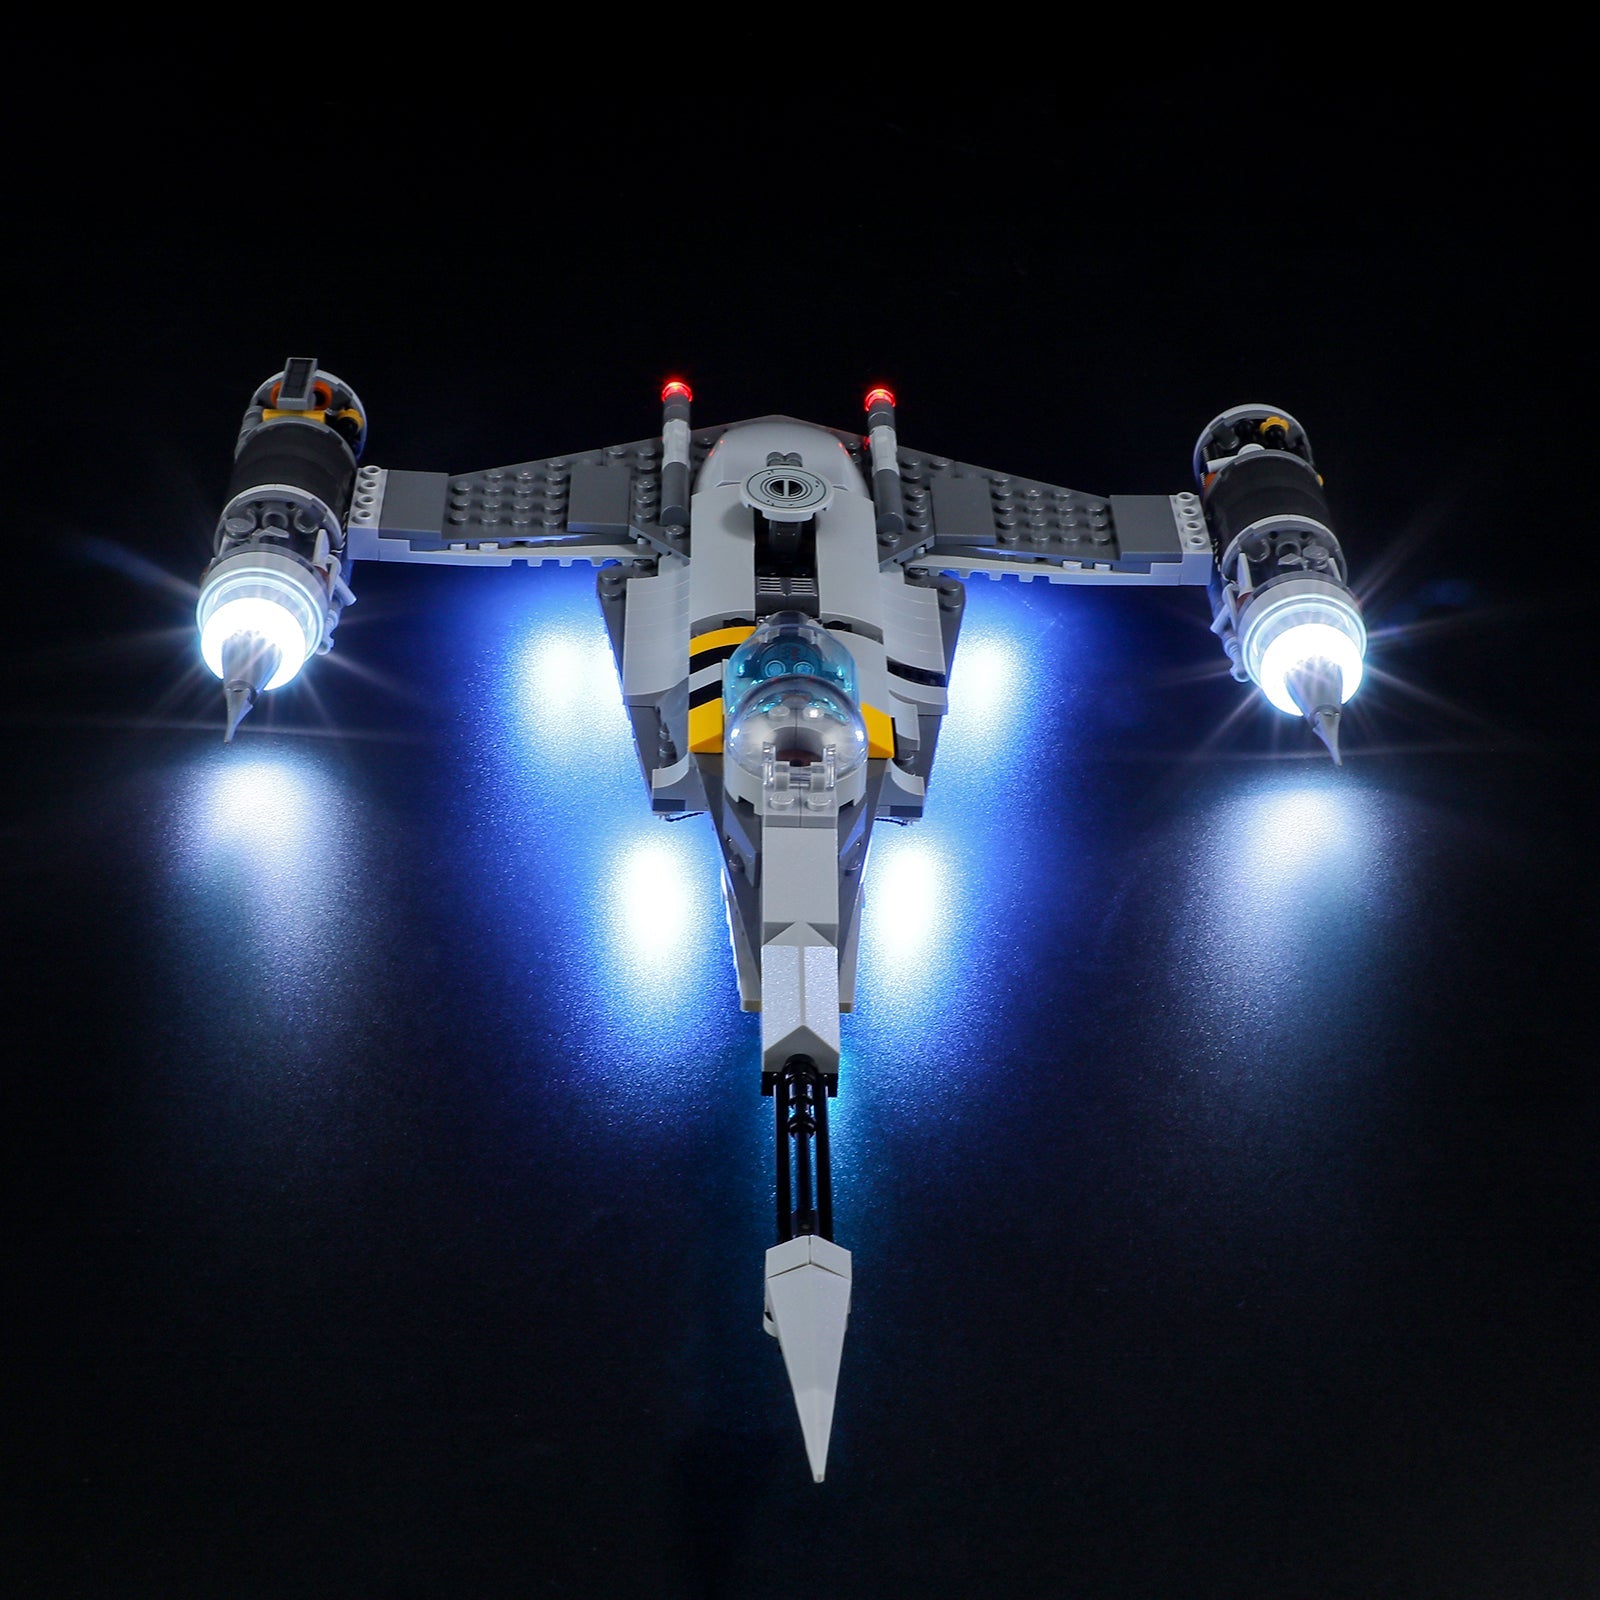 The Mandalorian's N-1 Starfighter 75325 Lego review